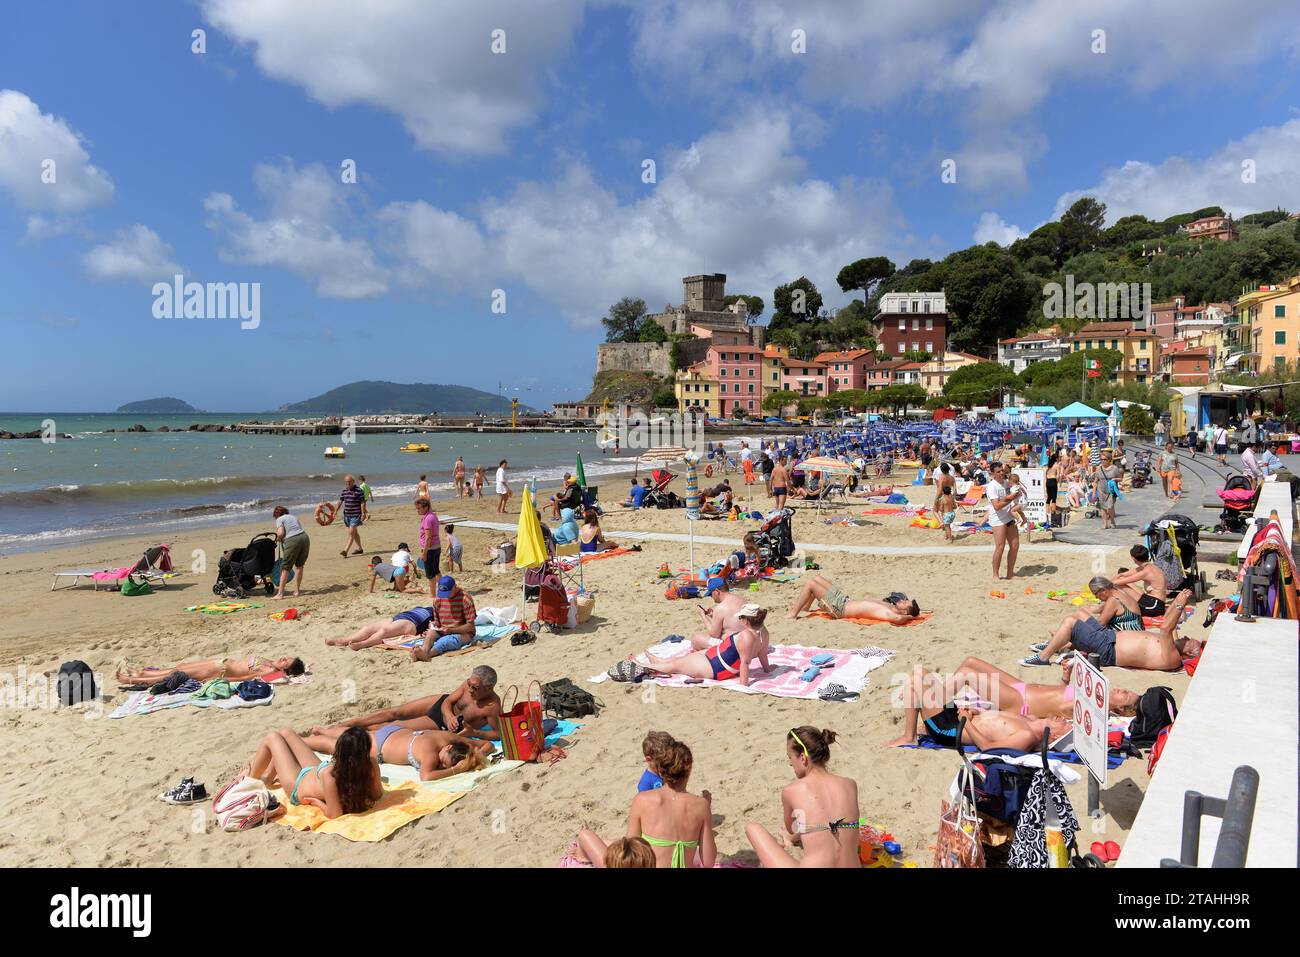 SAN TERENZO, LERICI, ITALY - JUNE 16, 2016: San Terenzo (St. Terenzo) beach crowded with bathers people in a June day. Stock Photo